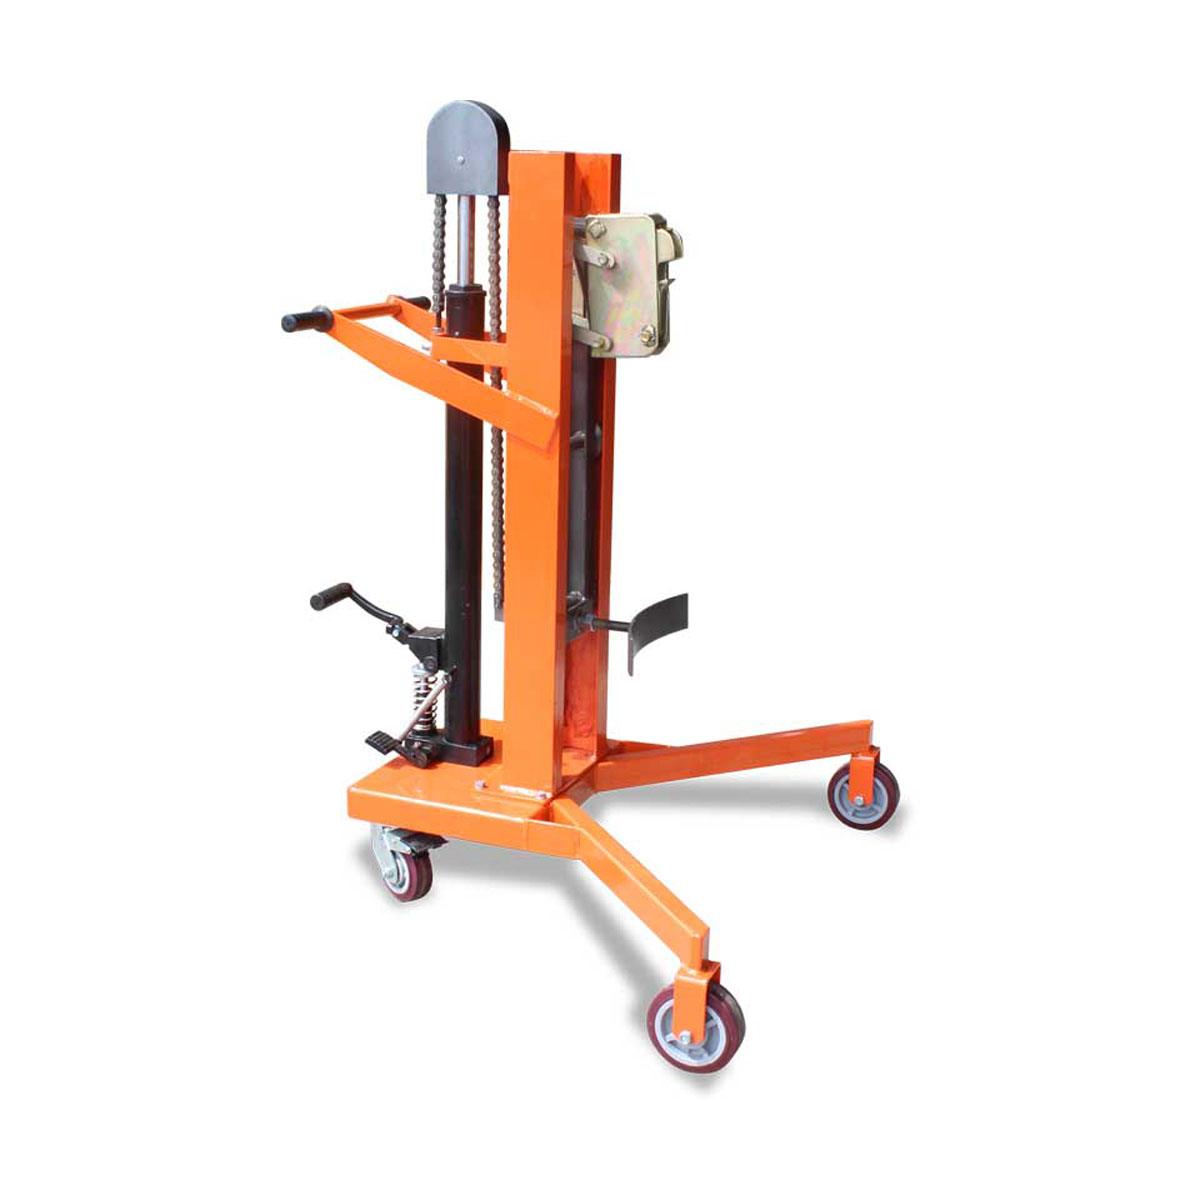 Buy Drum Lifter - Low (Angled Legs) in Drum Handling from Astrolift NZ